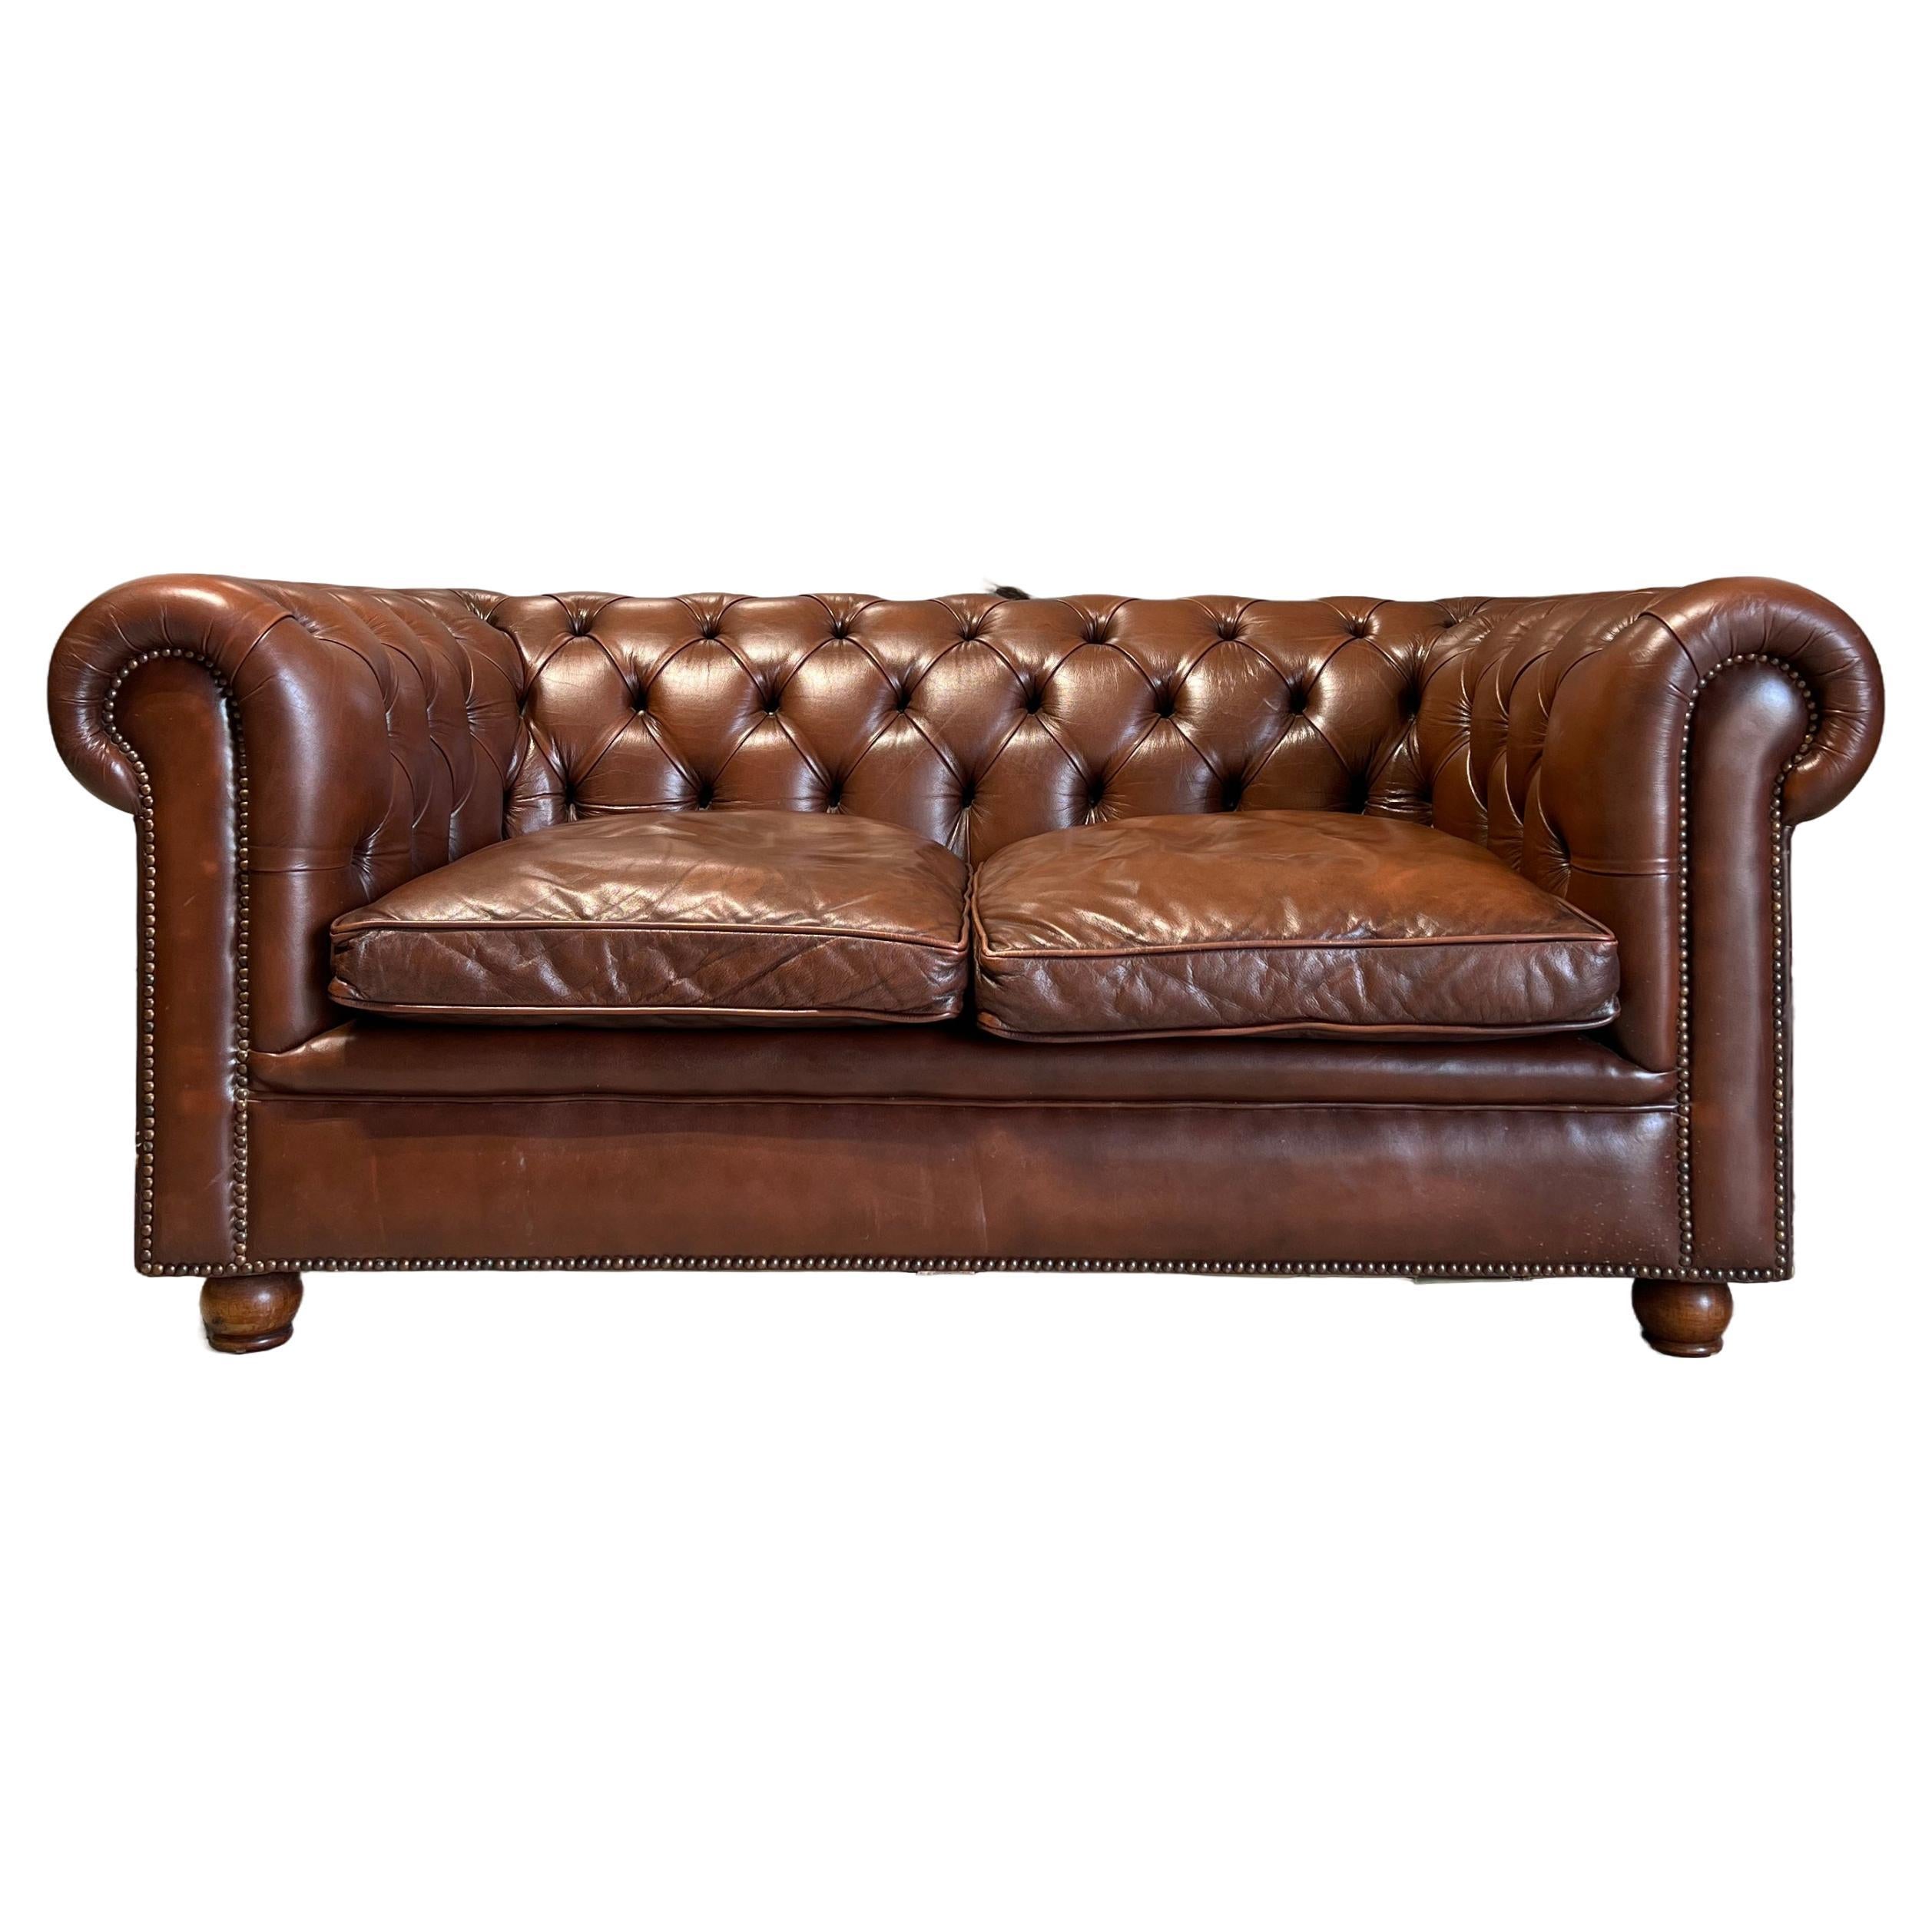 1 of a Pair - A Very Smart Mid-Late 20thC Leather Chesterfield Sofa  For Sale